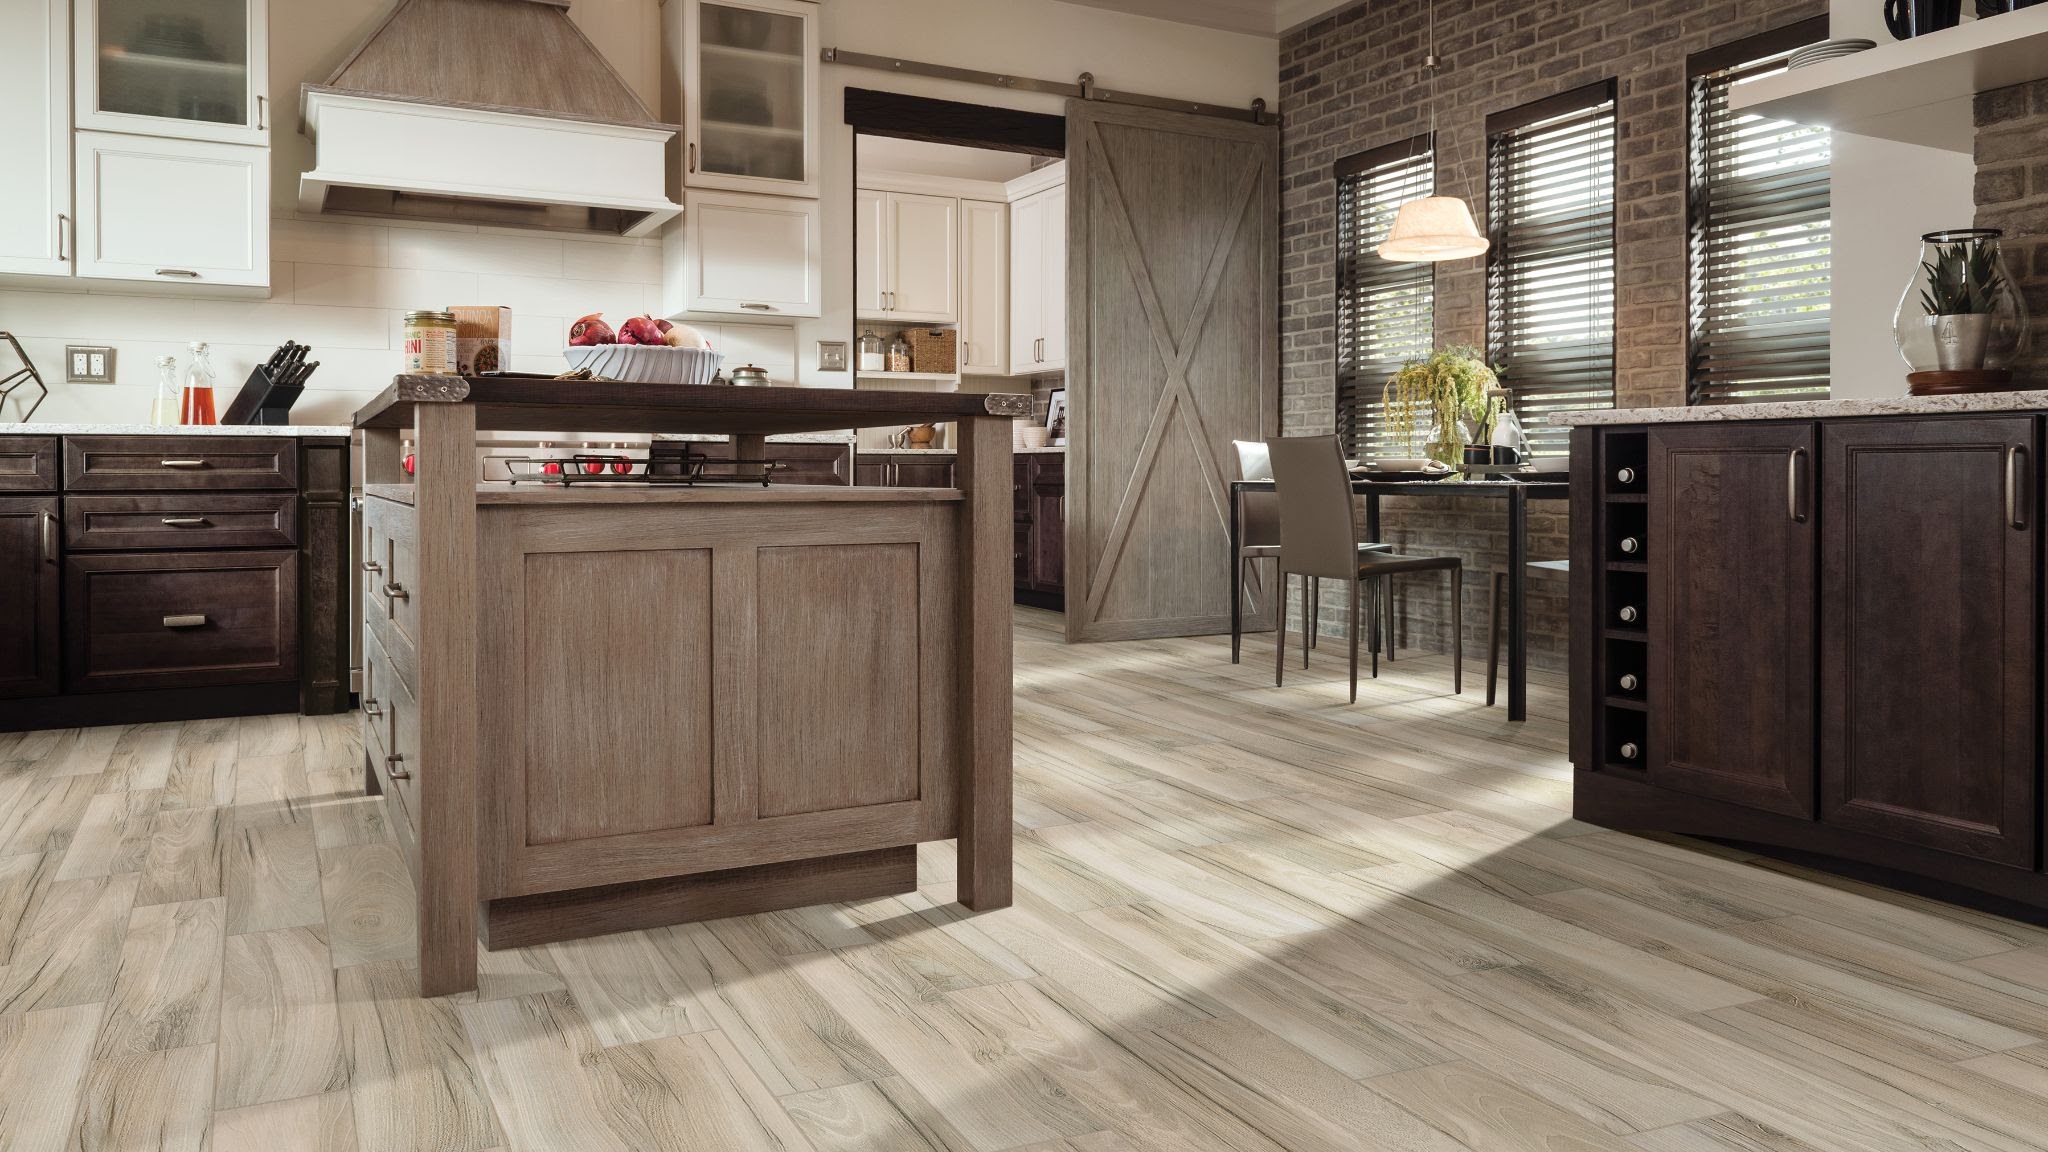 Wood-look tile in a kitchen, installation services available